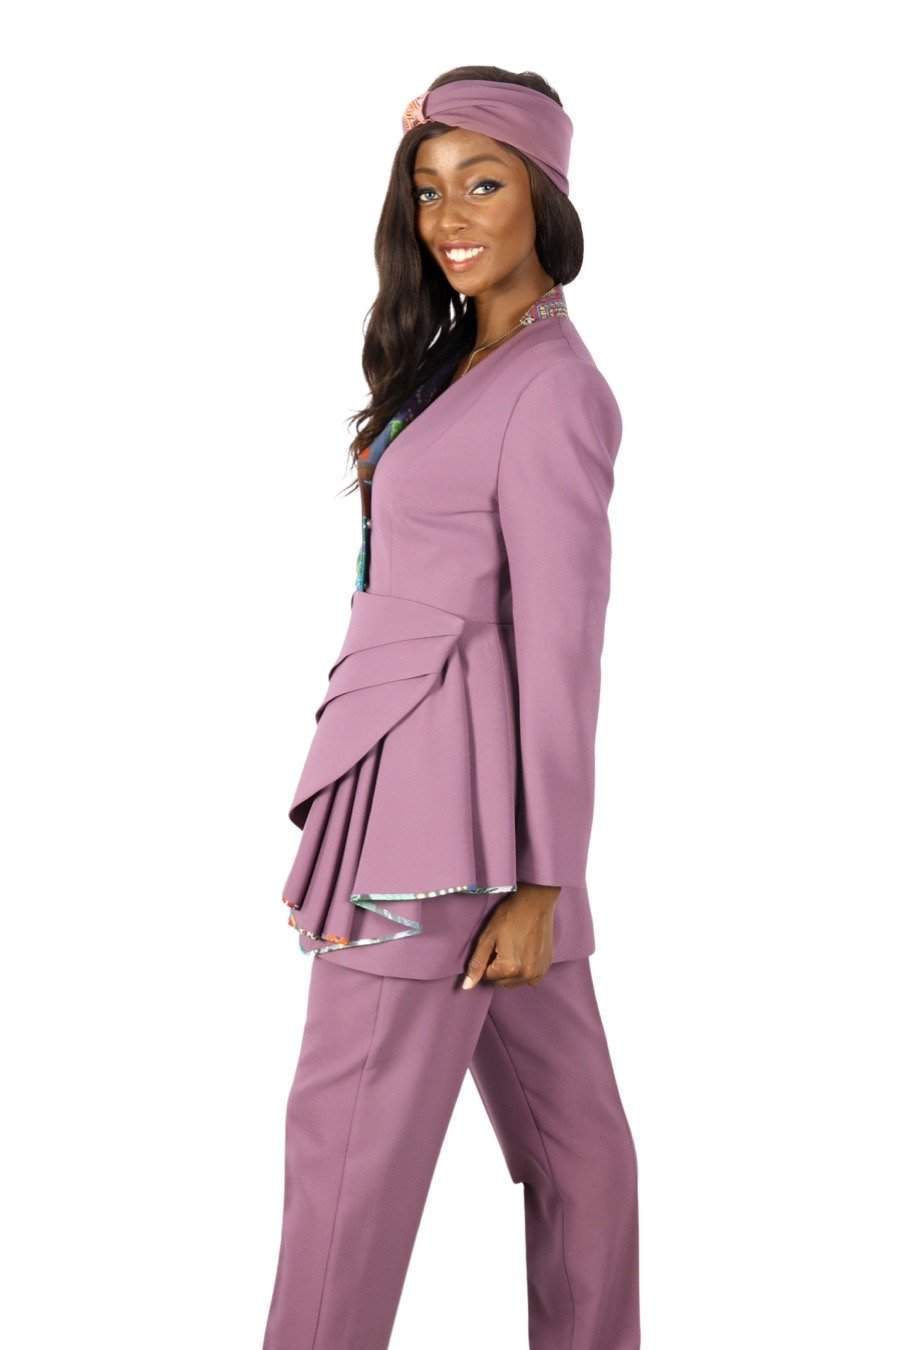 African Patched stylish suit-danddclothing-AFRICAN WEAR FOR WOMEN,Ladies Suits,Violet